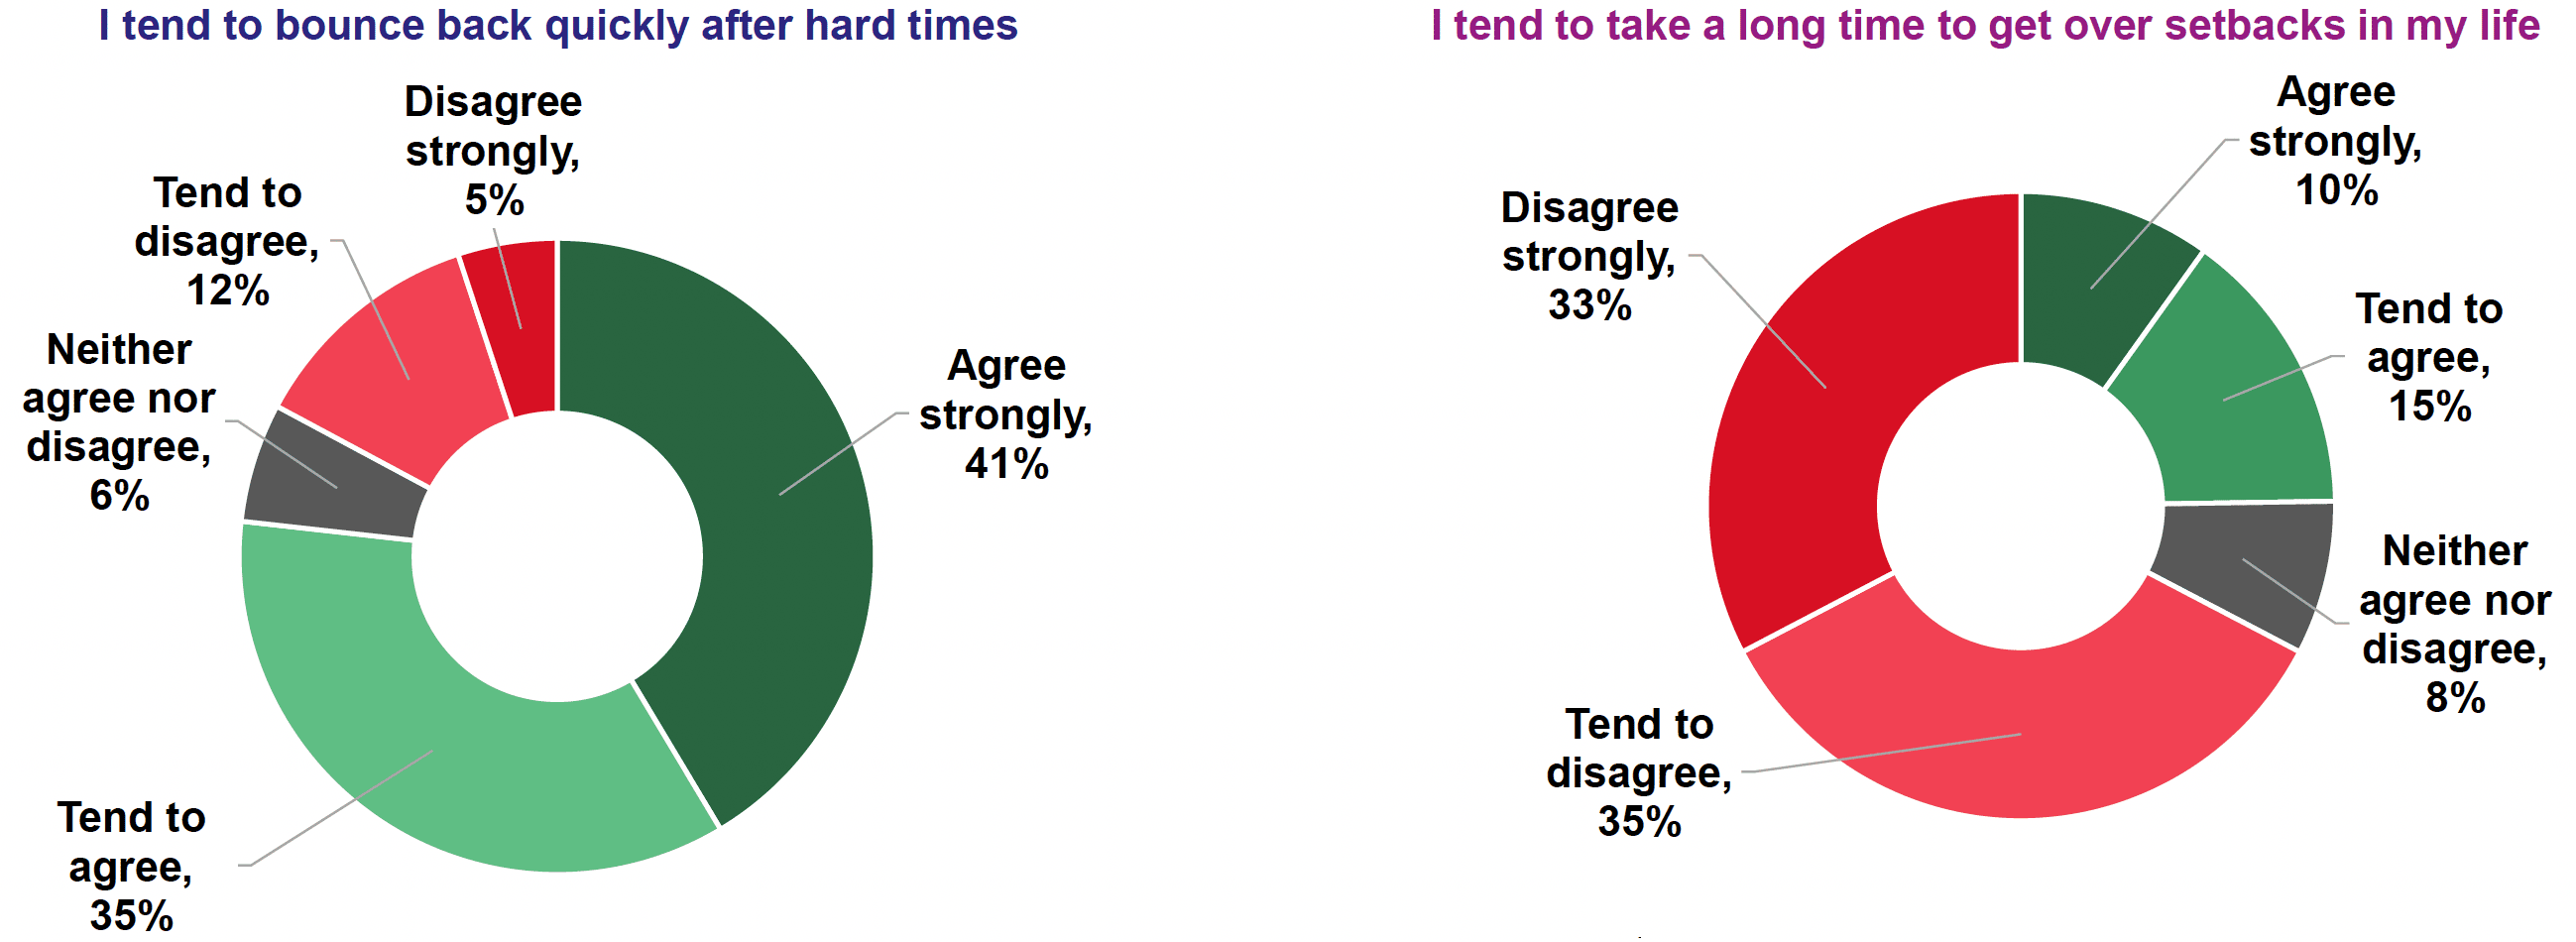 Pie chart A showing that 76% agree they bounce back quickly after hard times. Pie chart B showing that 68% disagree that they take a long time to get over setbacks